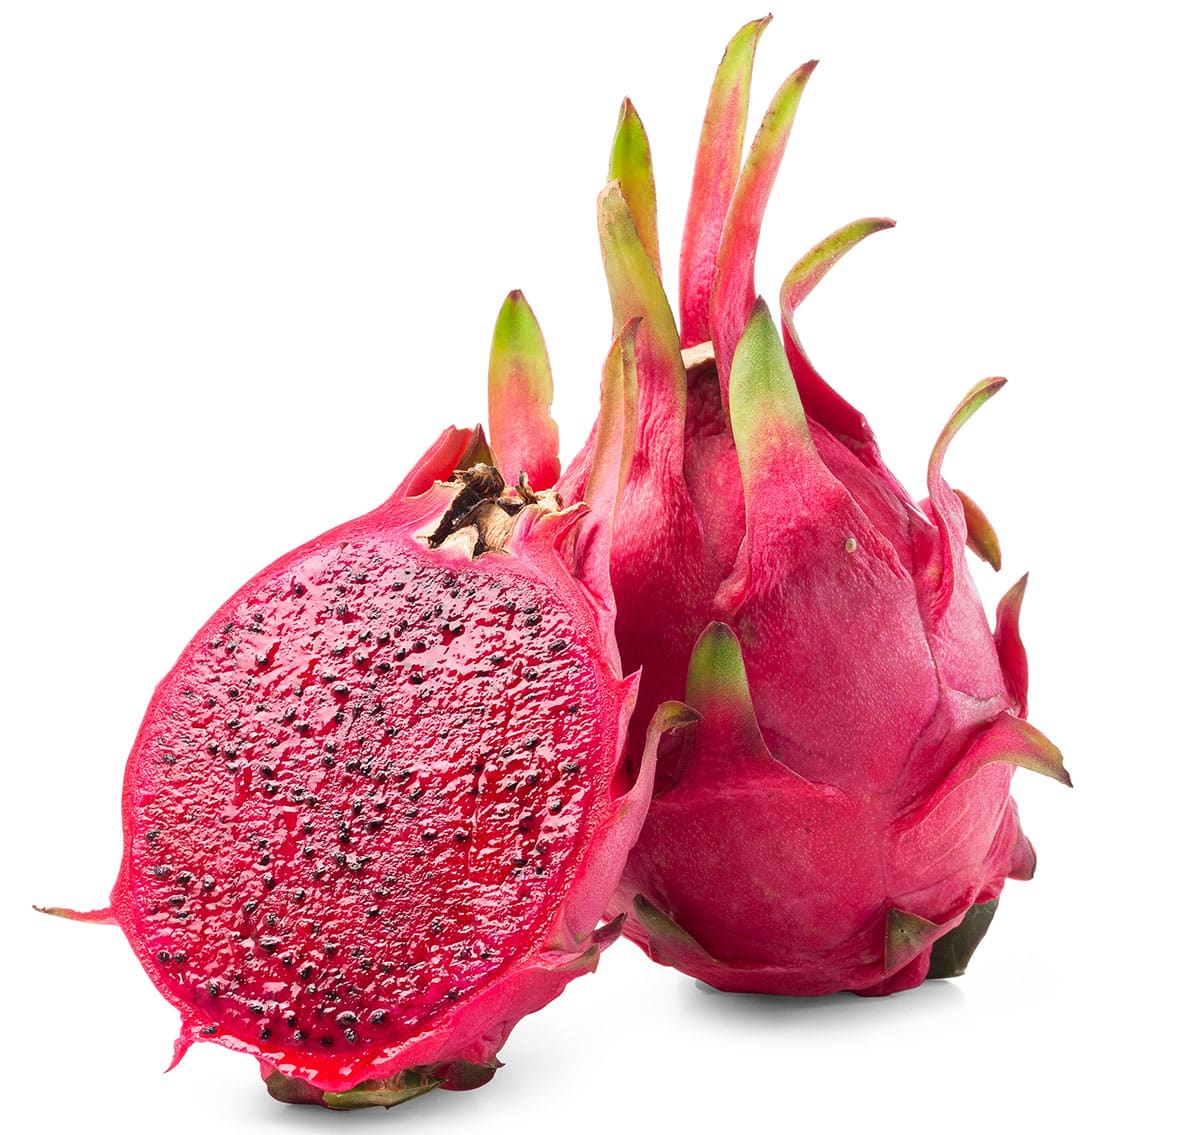 Red dragon fruit on an isolated white background.